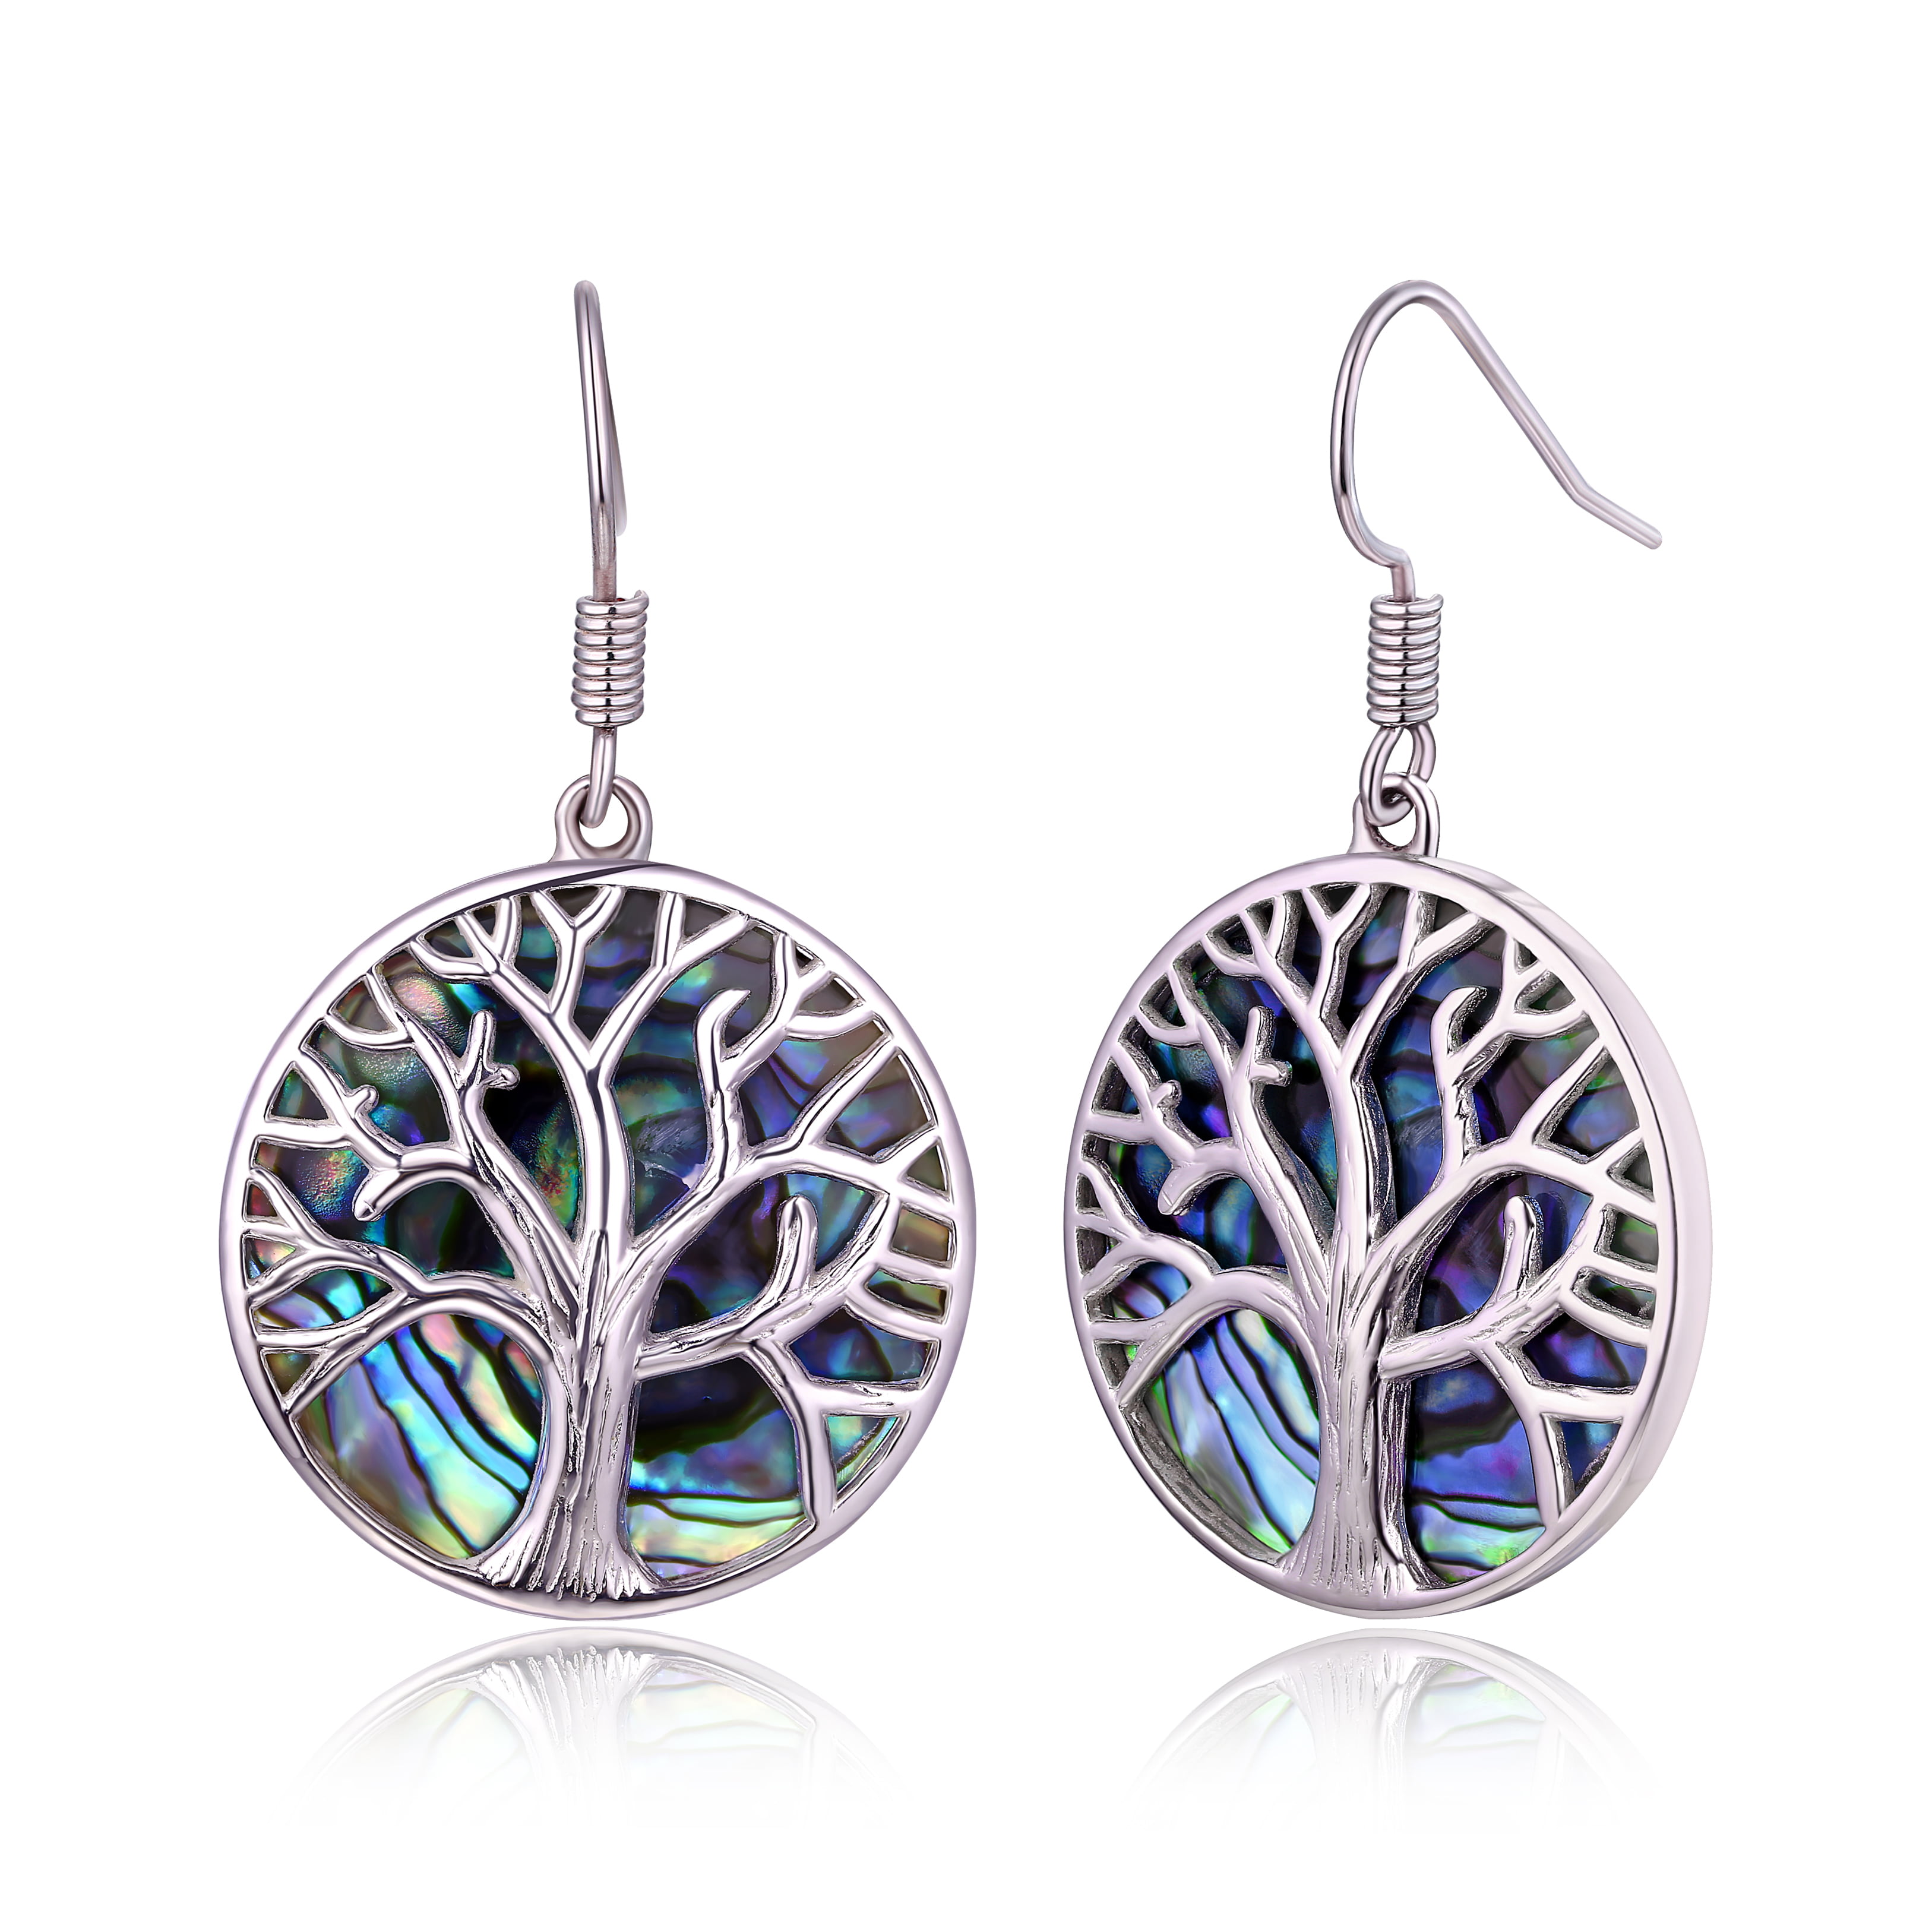 Round Dangling Tree of Life Earrings 925 Sterling Silver Fish Hook Choose Color 